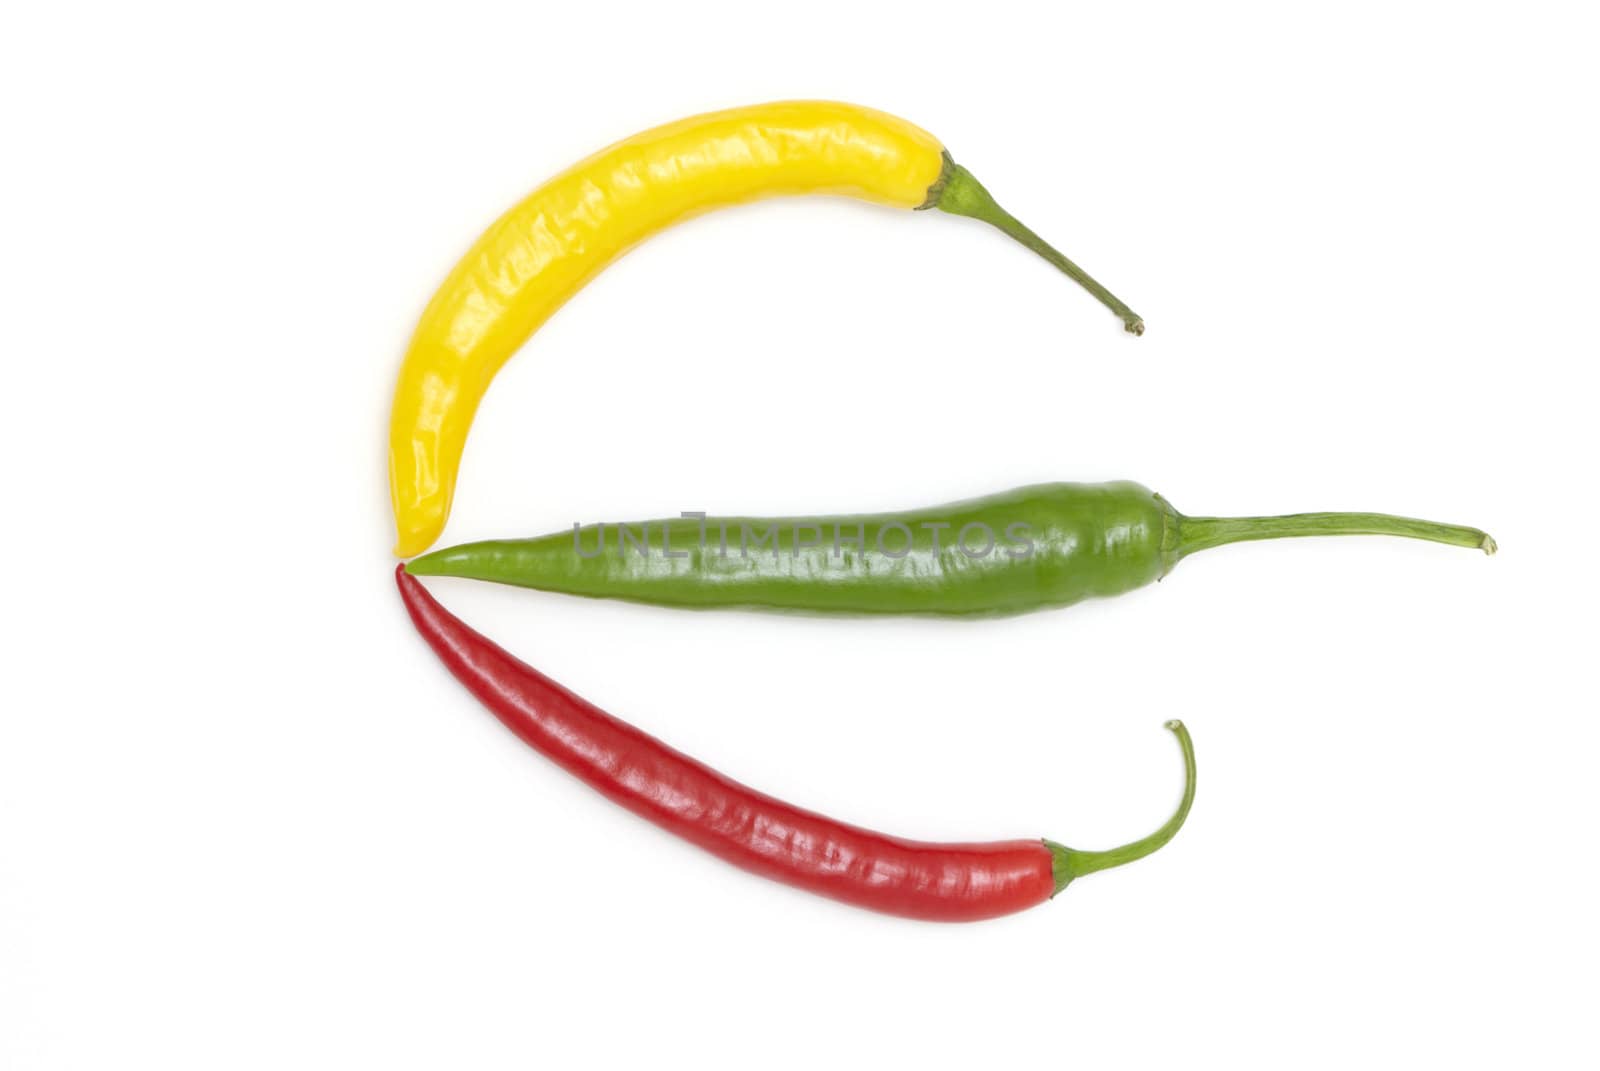 Color chili peppers on white background